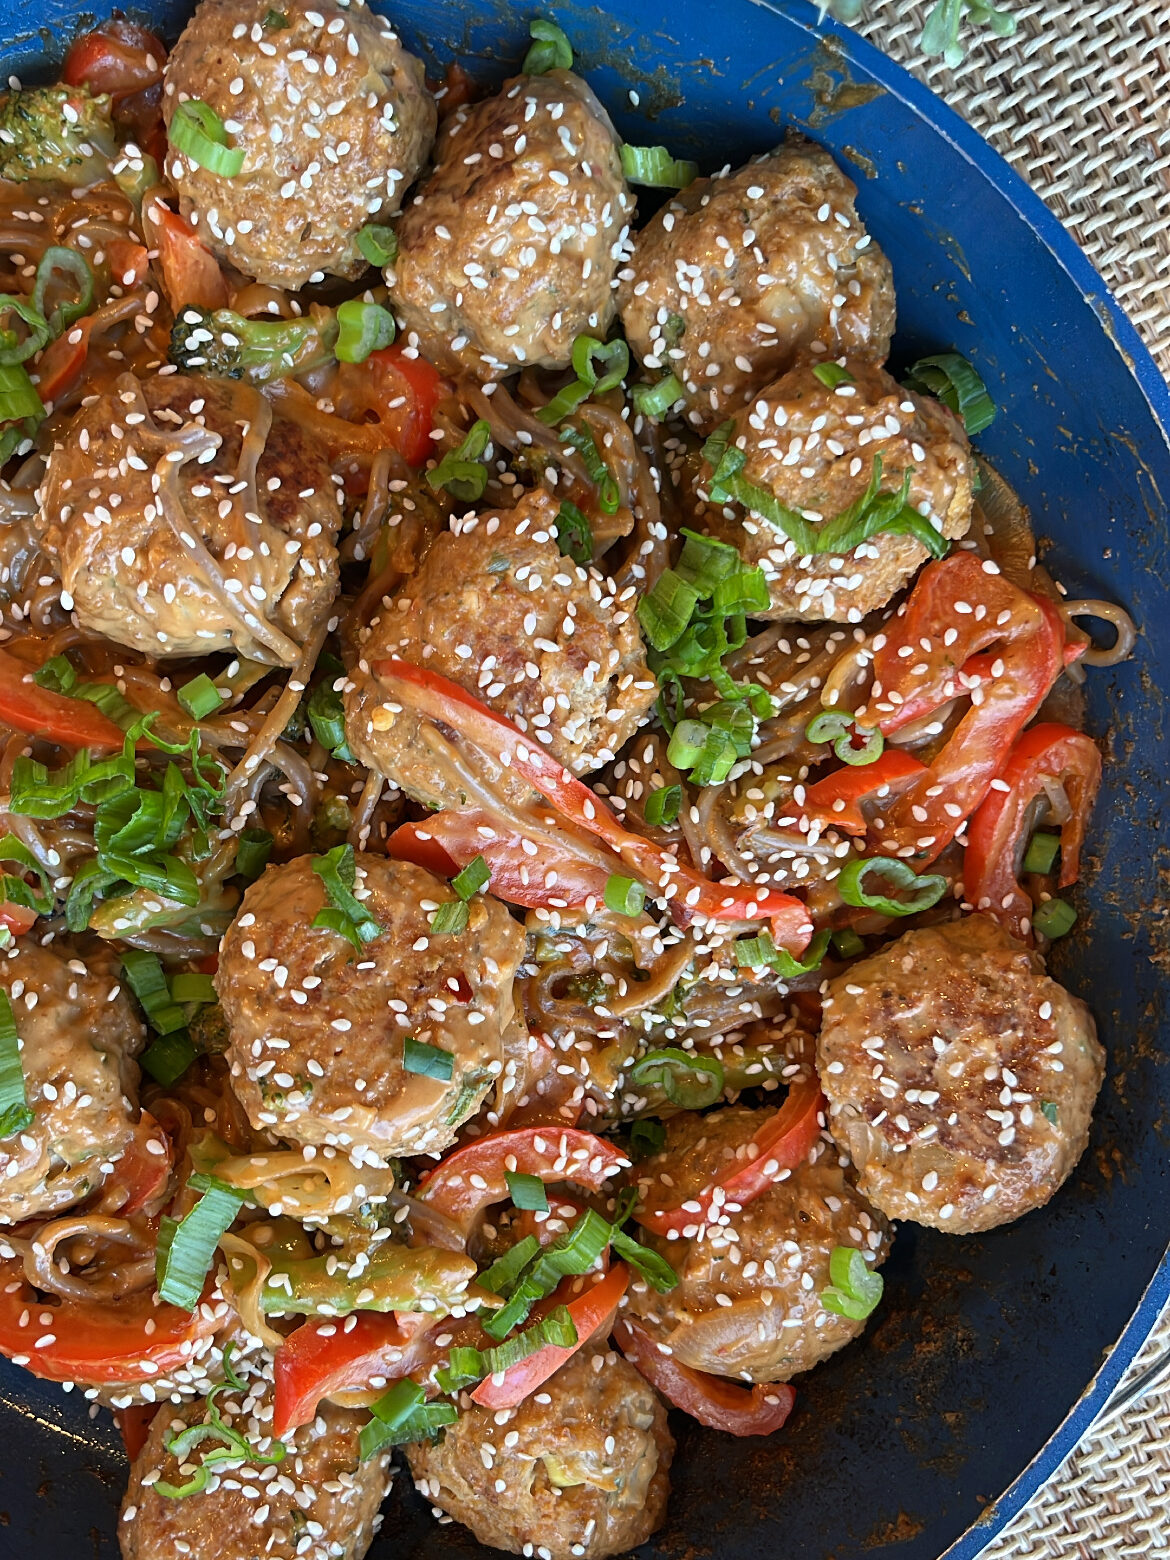 Bowl of cooked meatballs garnished with sesame seeds.